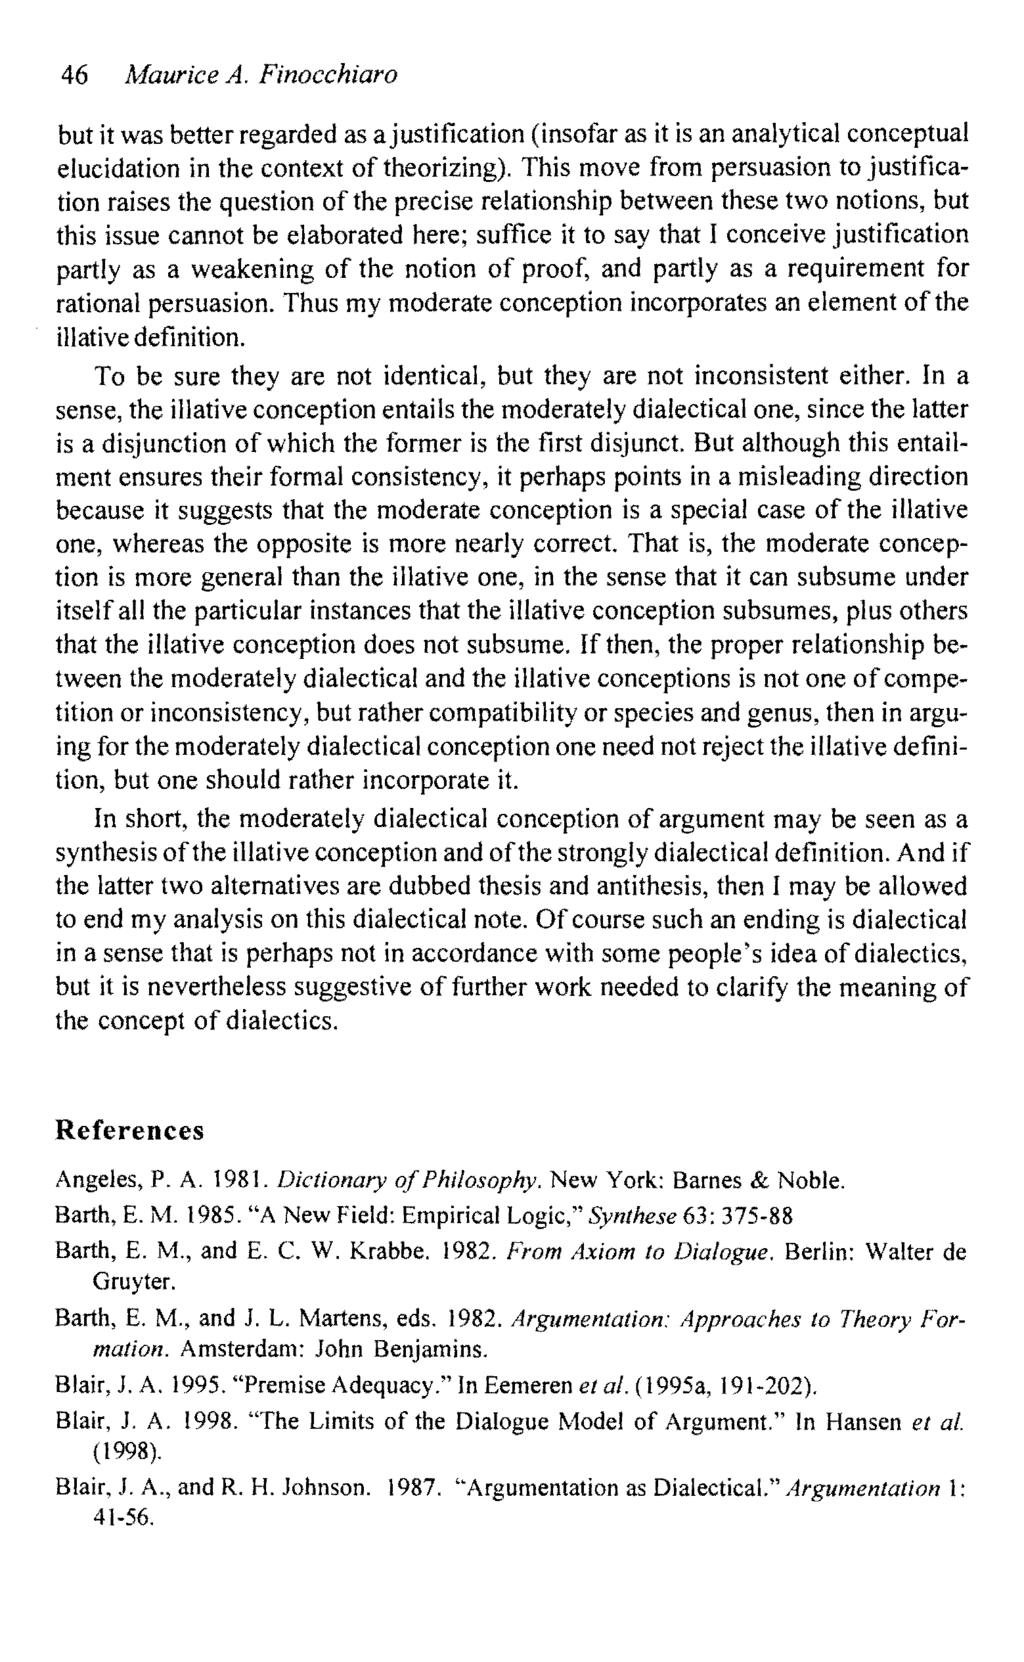 46 Maurice A. Finocchiaro but it was better regarded as a justification (insofar as it is an analytical conceptual elucidation in the context of theorizing).